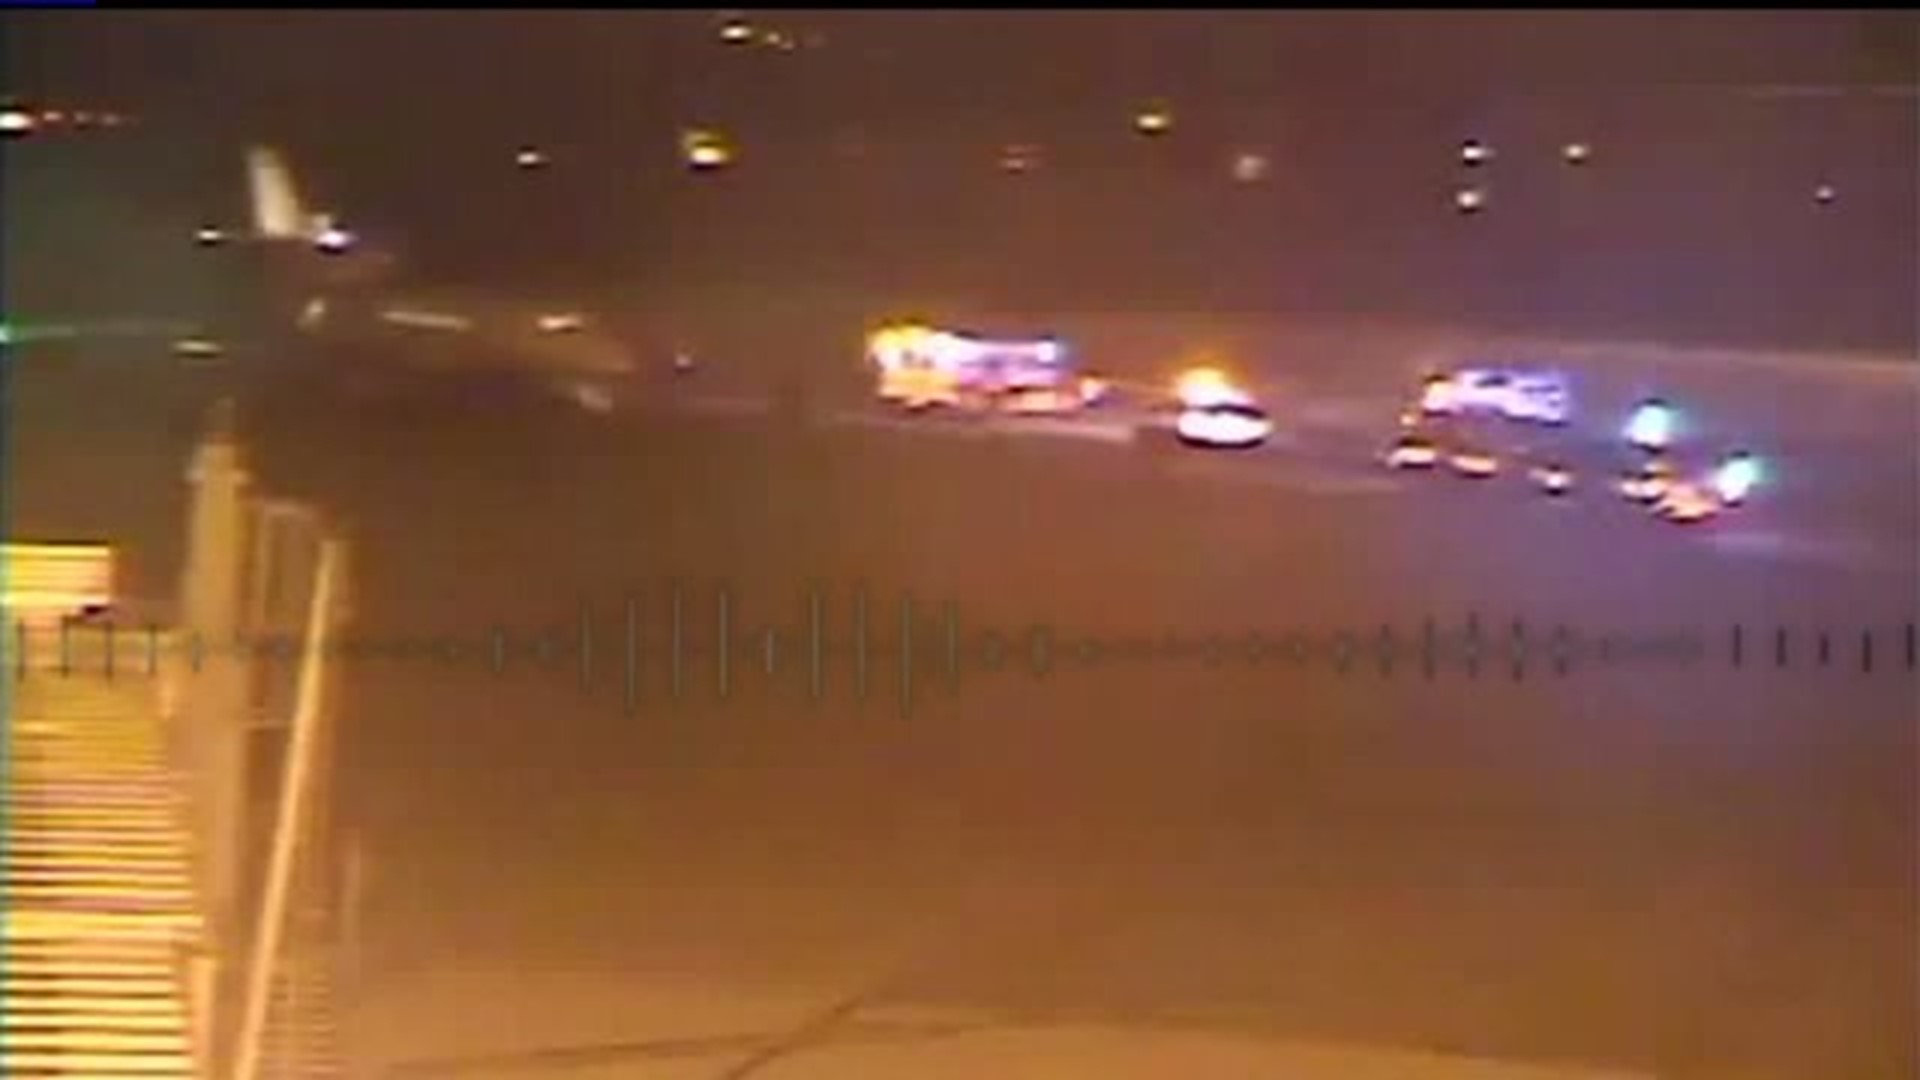 ATC Audio from Prince`s emergency landing in Moline